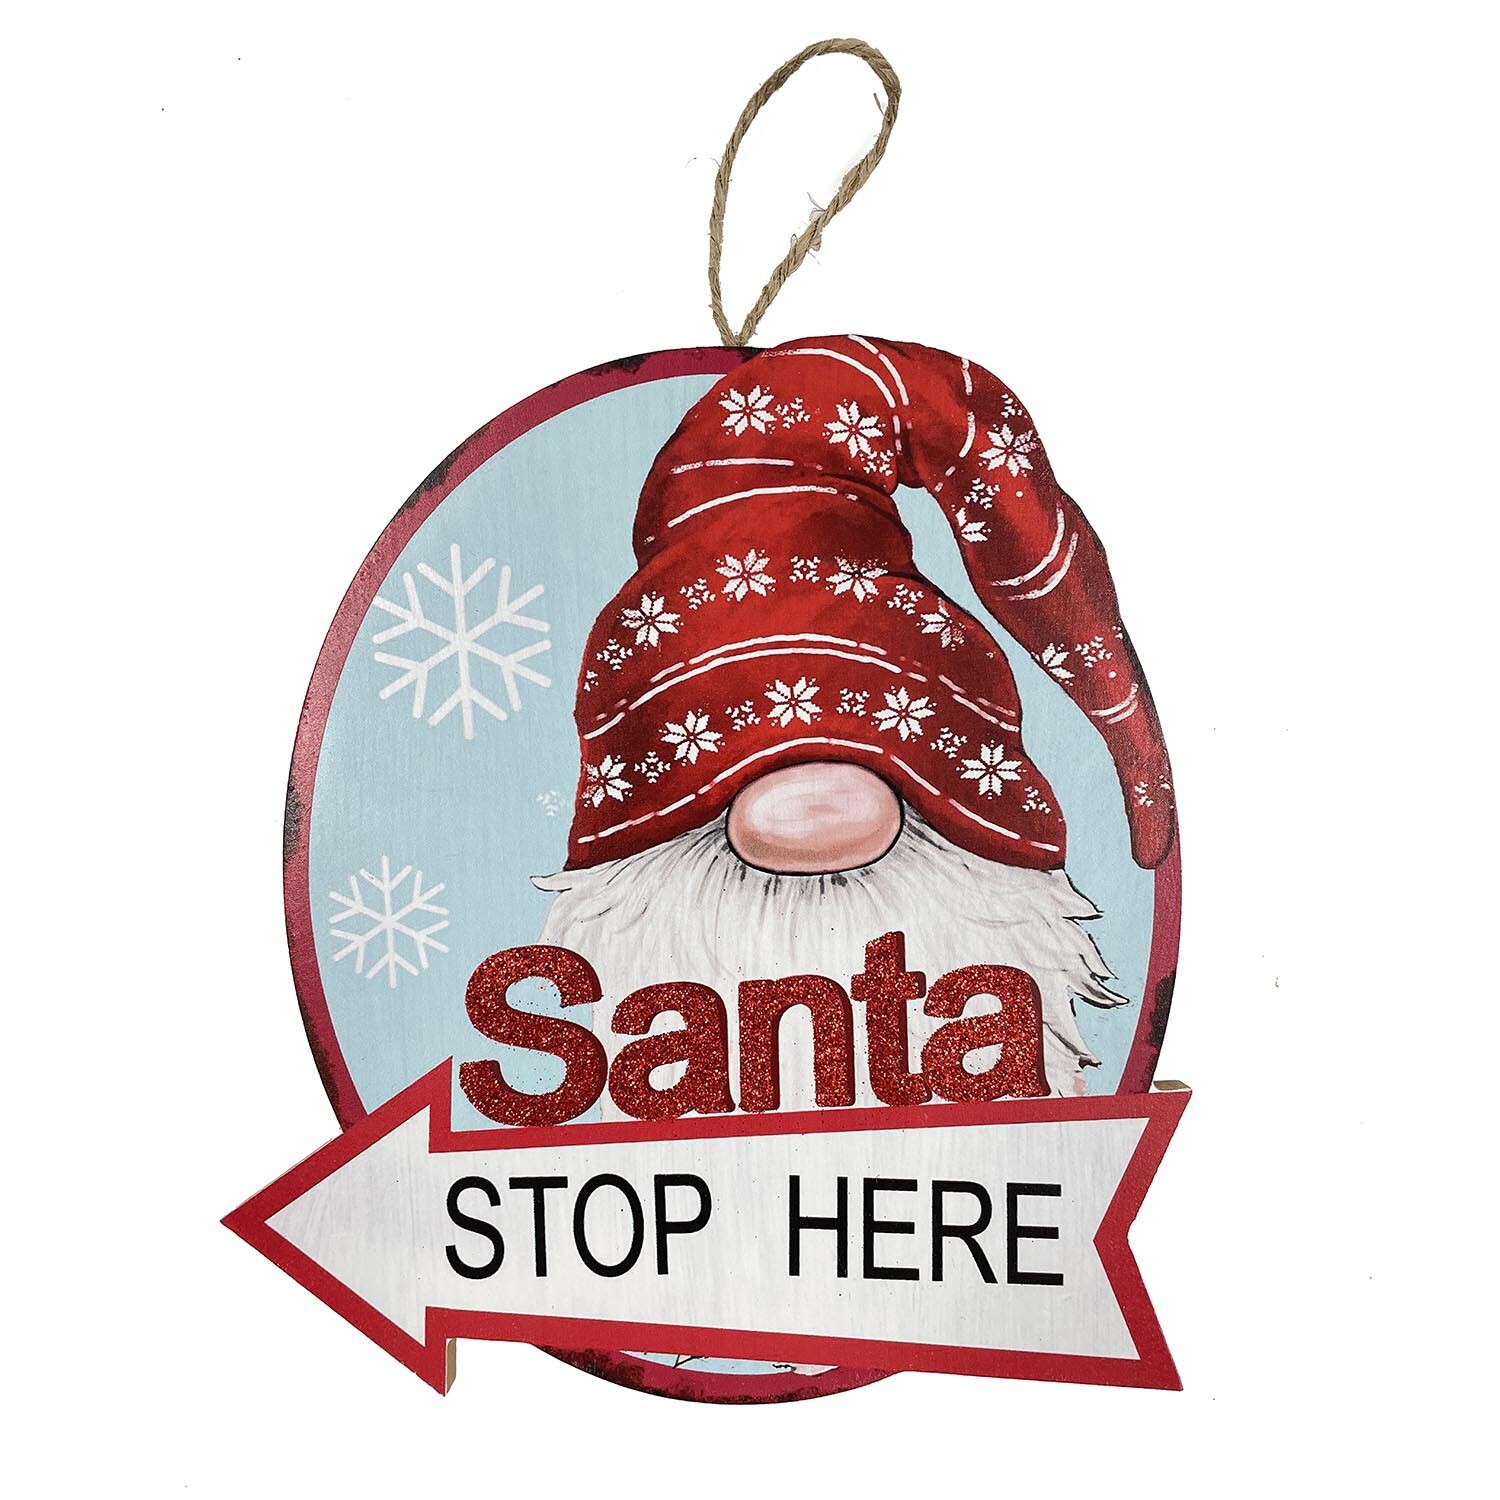 Candy Cane Wishes Gonk Santa Stop Here Plaque Image